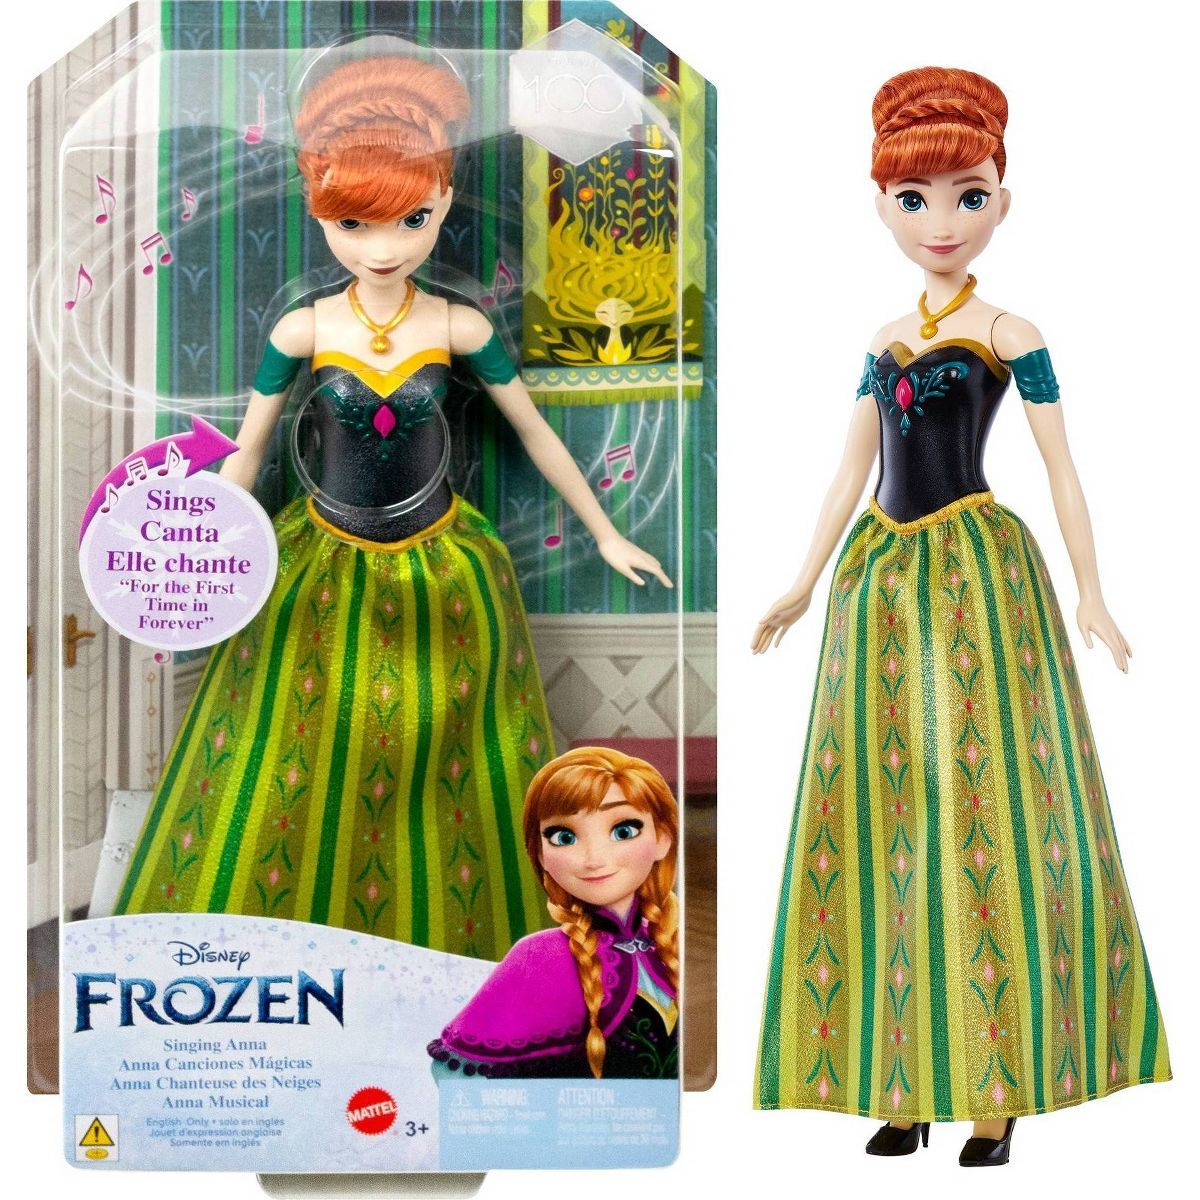 Disney Frozen Singing Anna Doll - Sings "For the First Time in Forever" | Target